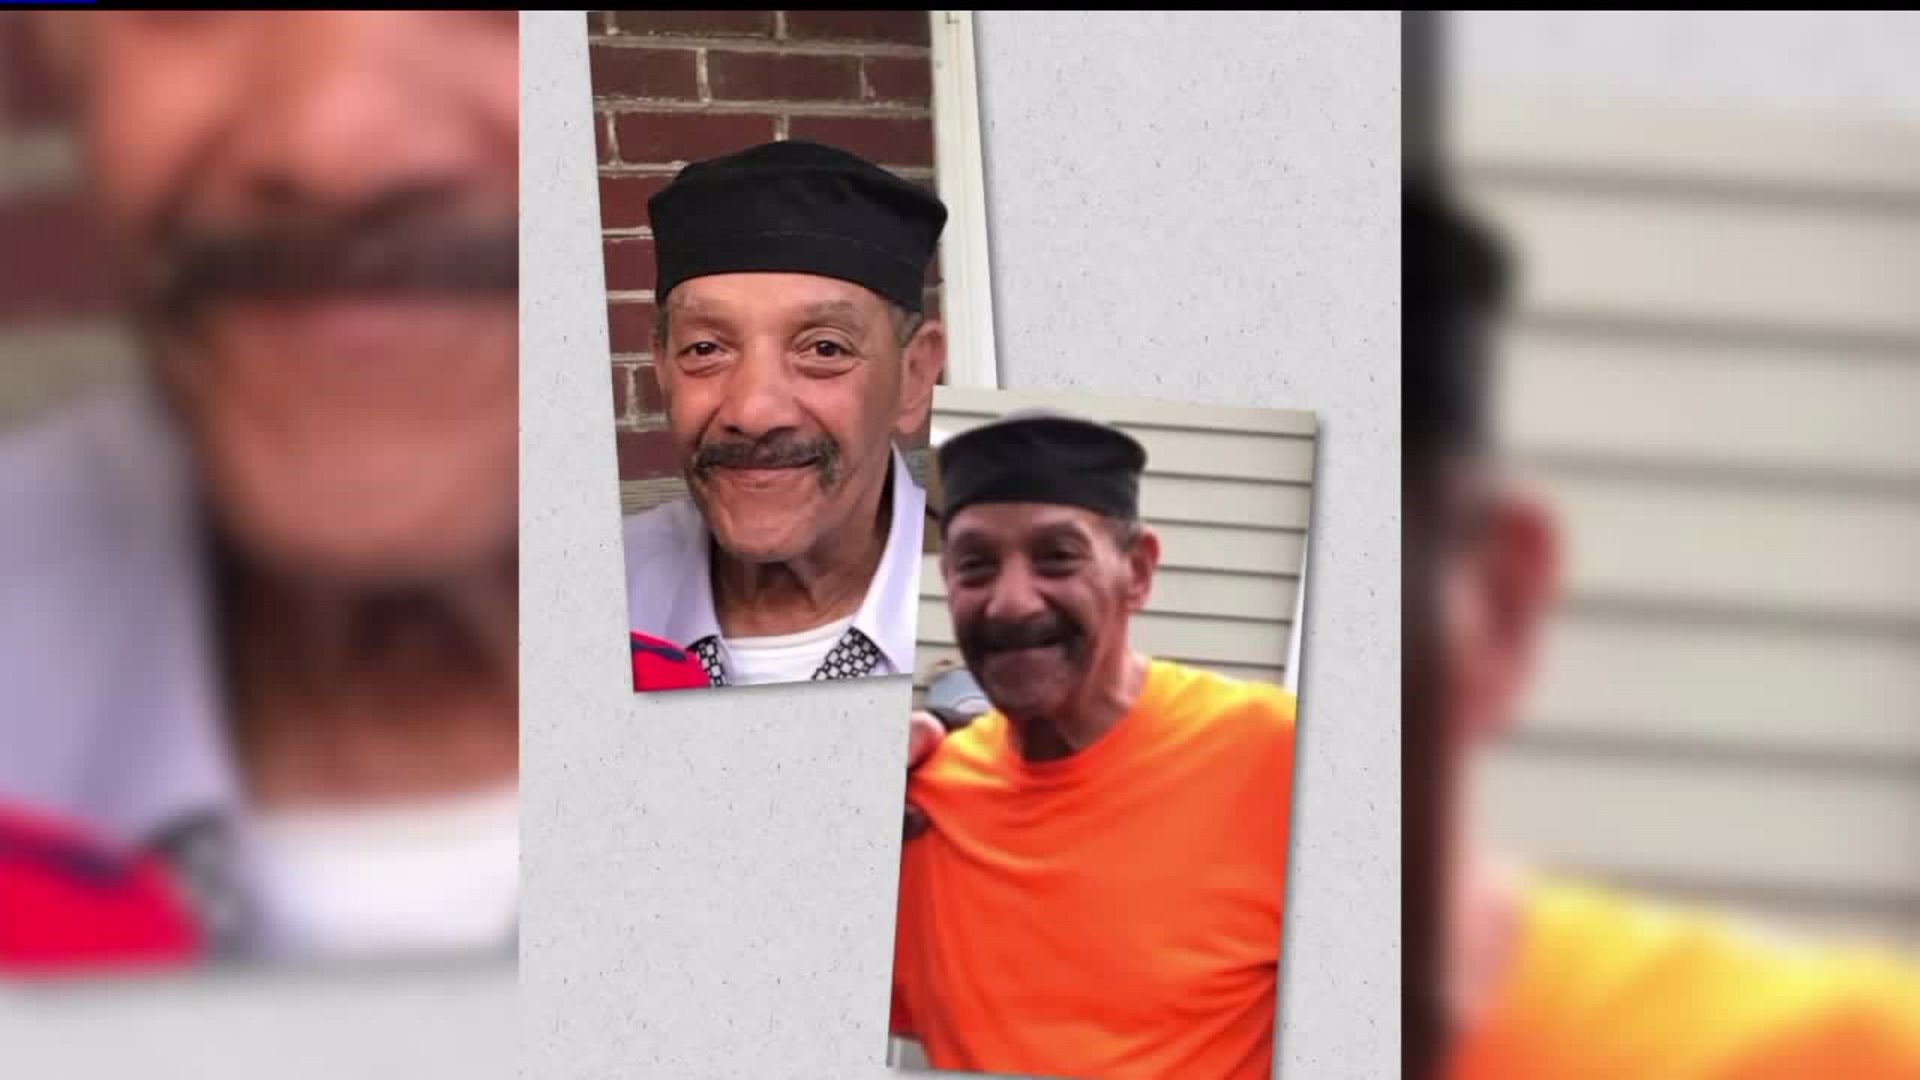 Search continues for missing Highspire man